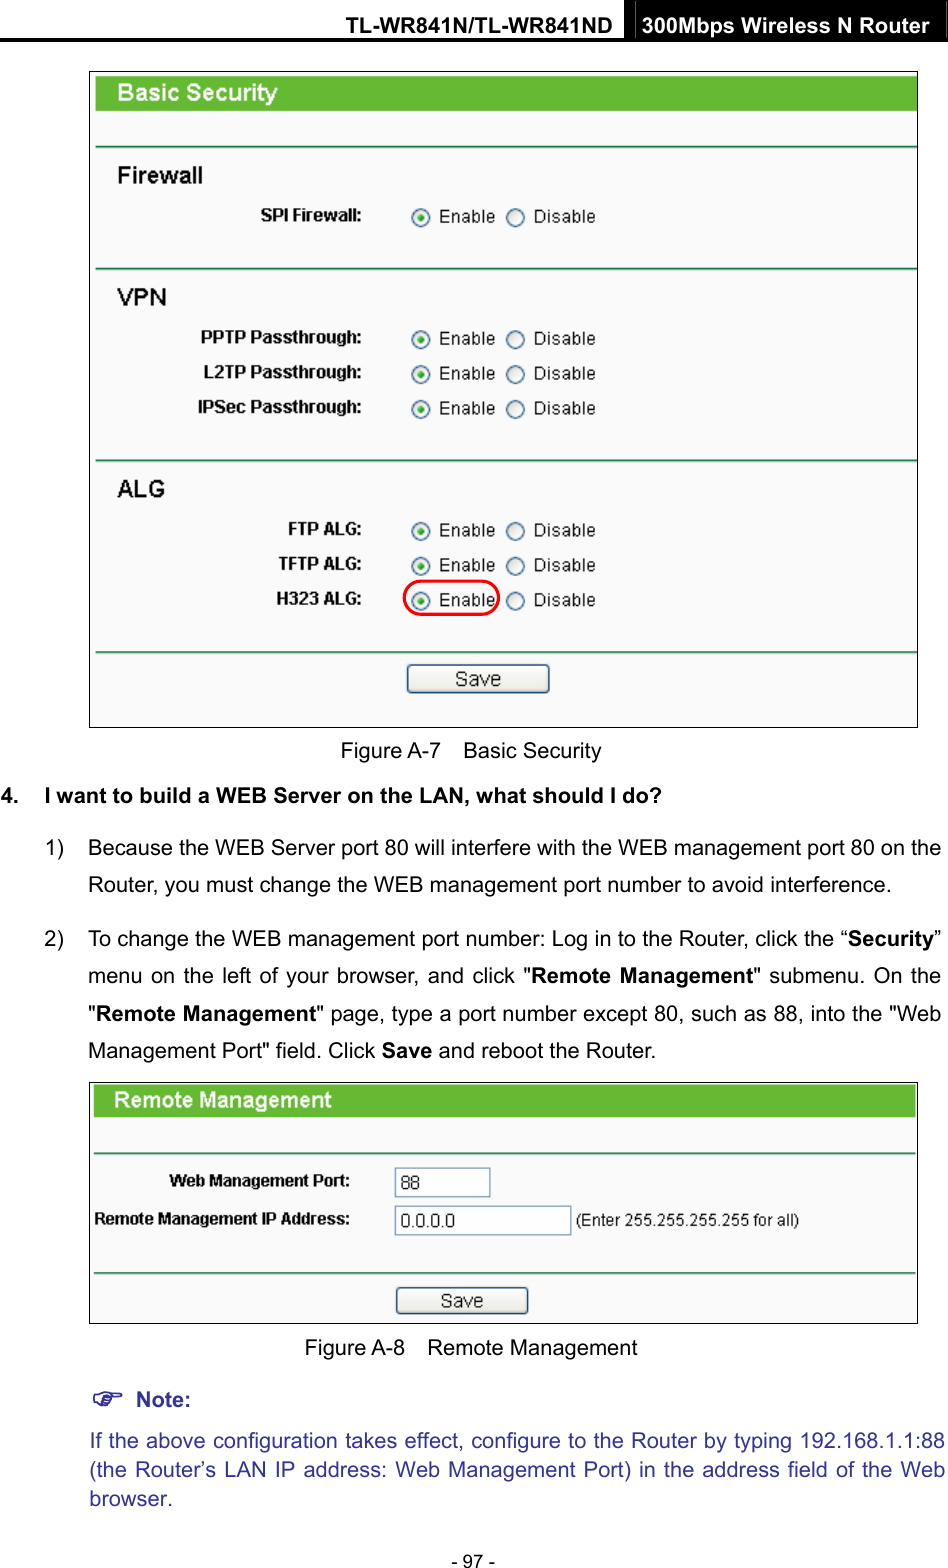 TL-WR841N/TL-WR841ND 300Mbps Wireless N Router - 97 -  Figure A-7  Basic Security 4.  I want to build a WEB Server on the LAN, what should I do? 1)  Because the WEB Server port 80 will interfere with the WEB management port 80 on the Router, you must change the WEB management port number to avoid interference. 2)  To change the WEB management port number: Log in to the Router, click the “Security” menu on the left of your browser, and click &quot;Remote Management&quot; submenu. On the &quot;Remote Management&quot; page, type a port number except 80, such as 88, into the &quot;Web Management Port&quot; field. Click Save and reboot the Router.  Figure A-8  Remote Management ) Note: If the above configuration takes effect, configure to the Router by typing 192.168.1.1:88 (the Router’s LAN IP address: Web Management Port) in the address field of the Web browser. 